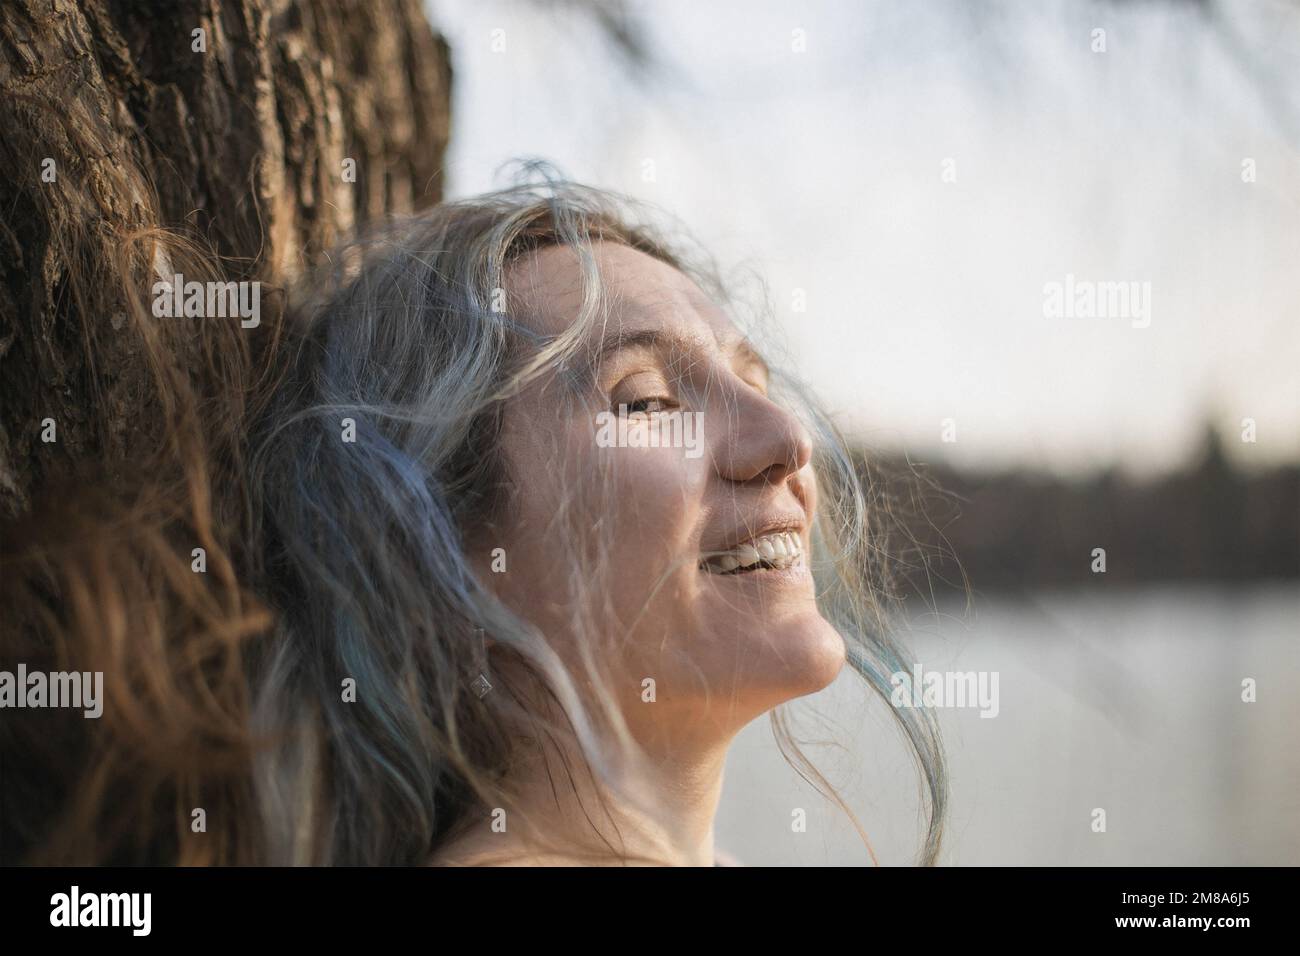 Close up woman with gray ruffled hair laughing and looking sideway portrait picture Stock Photo